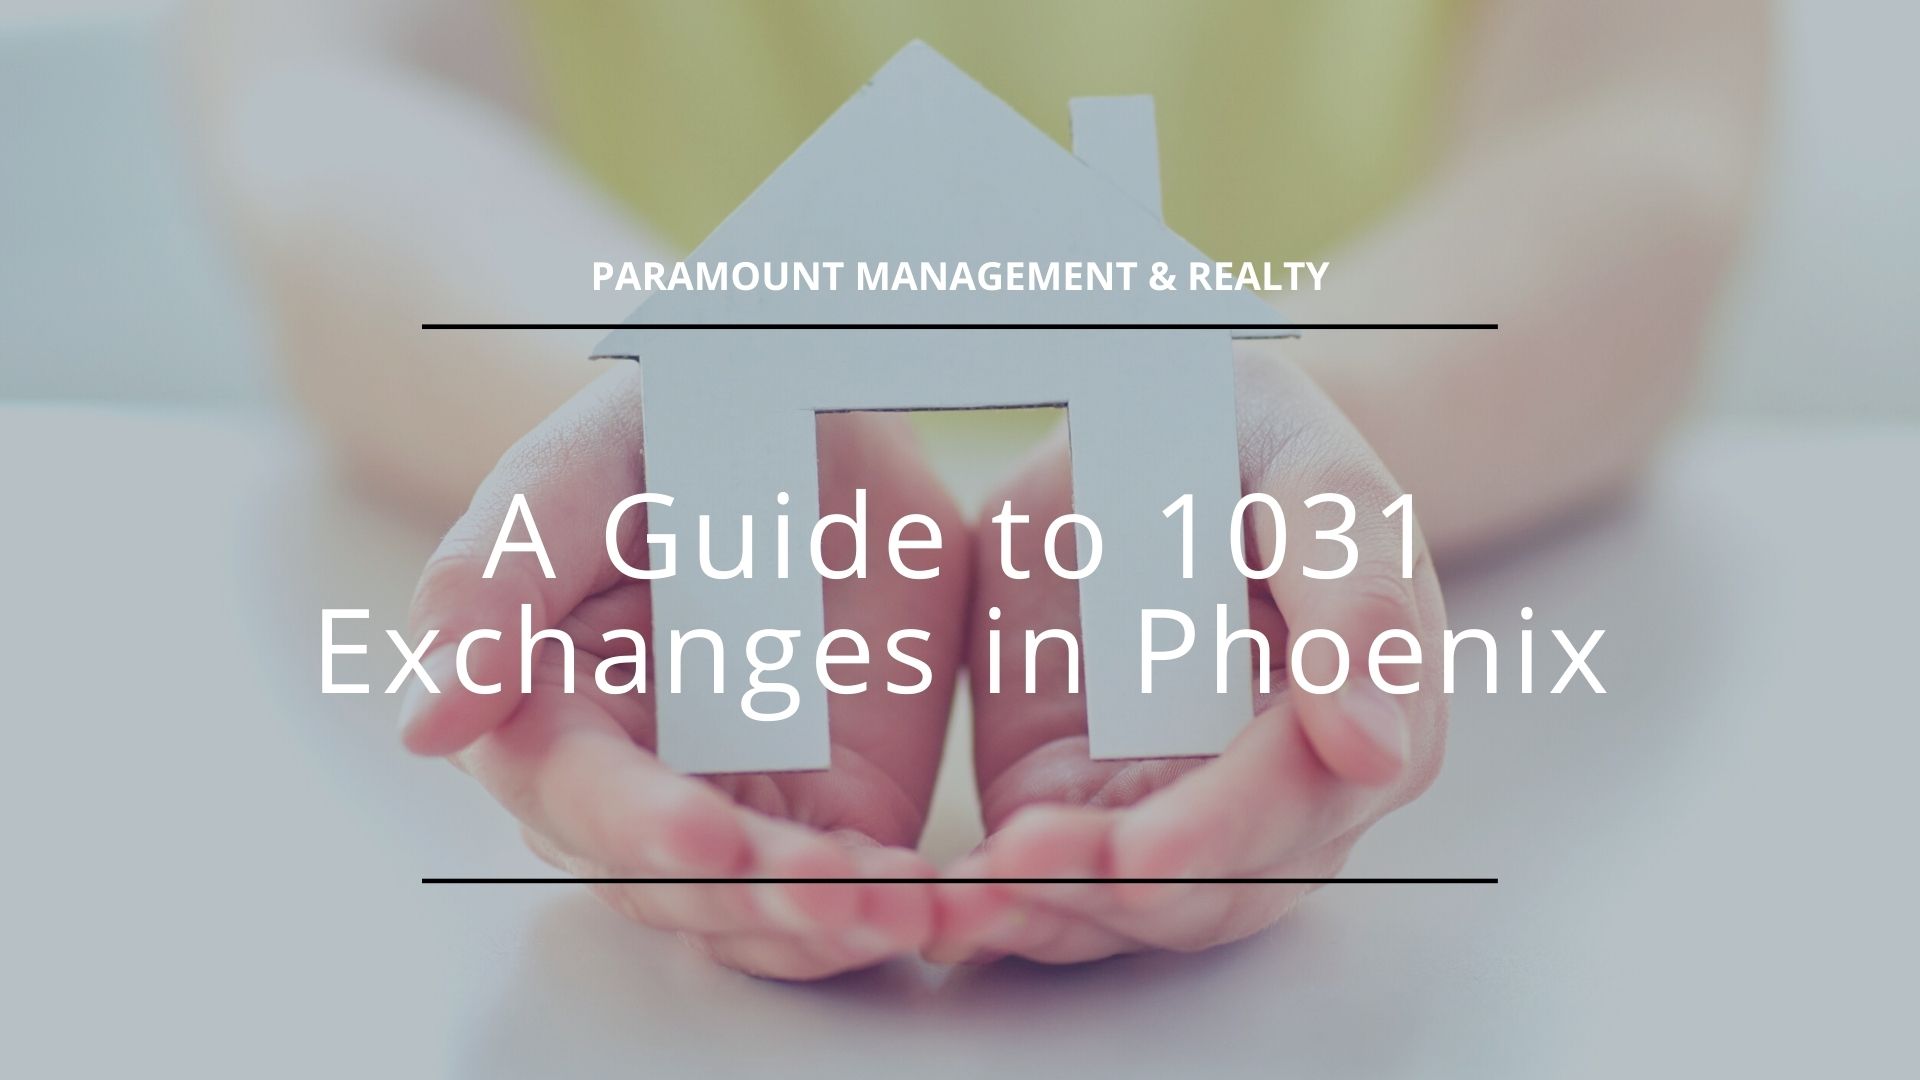 1031 exchange and paying capital gains taxes